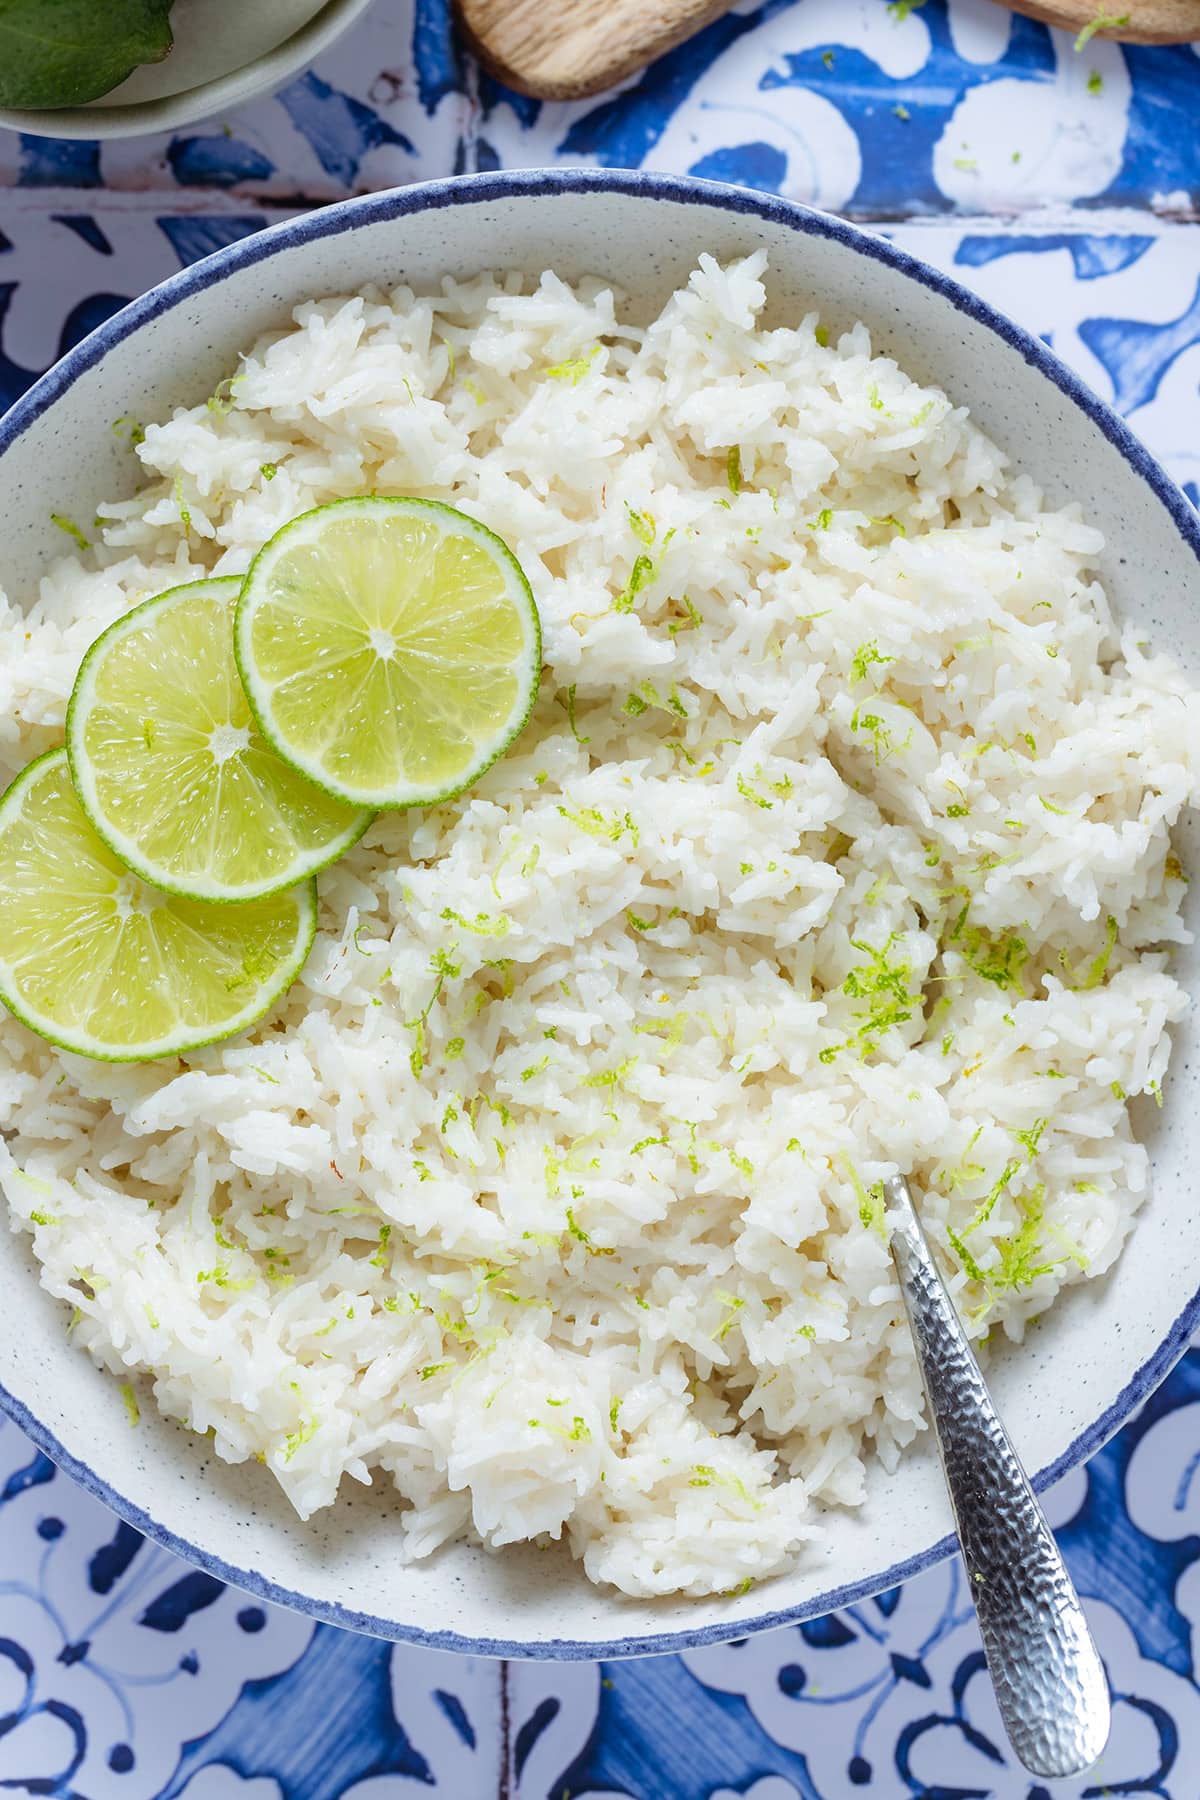 Coconut lime rice garnished with lime slices in a white bowl with a blue edge on a blue tile background.